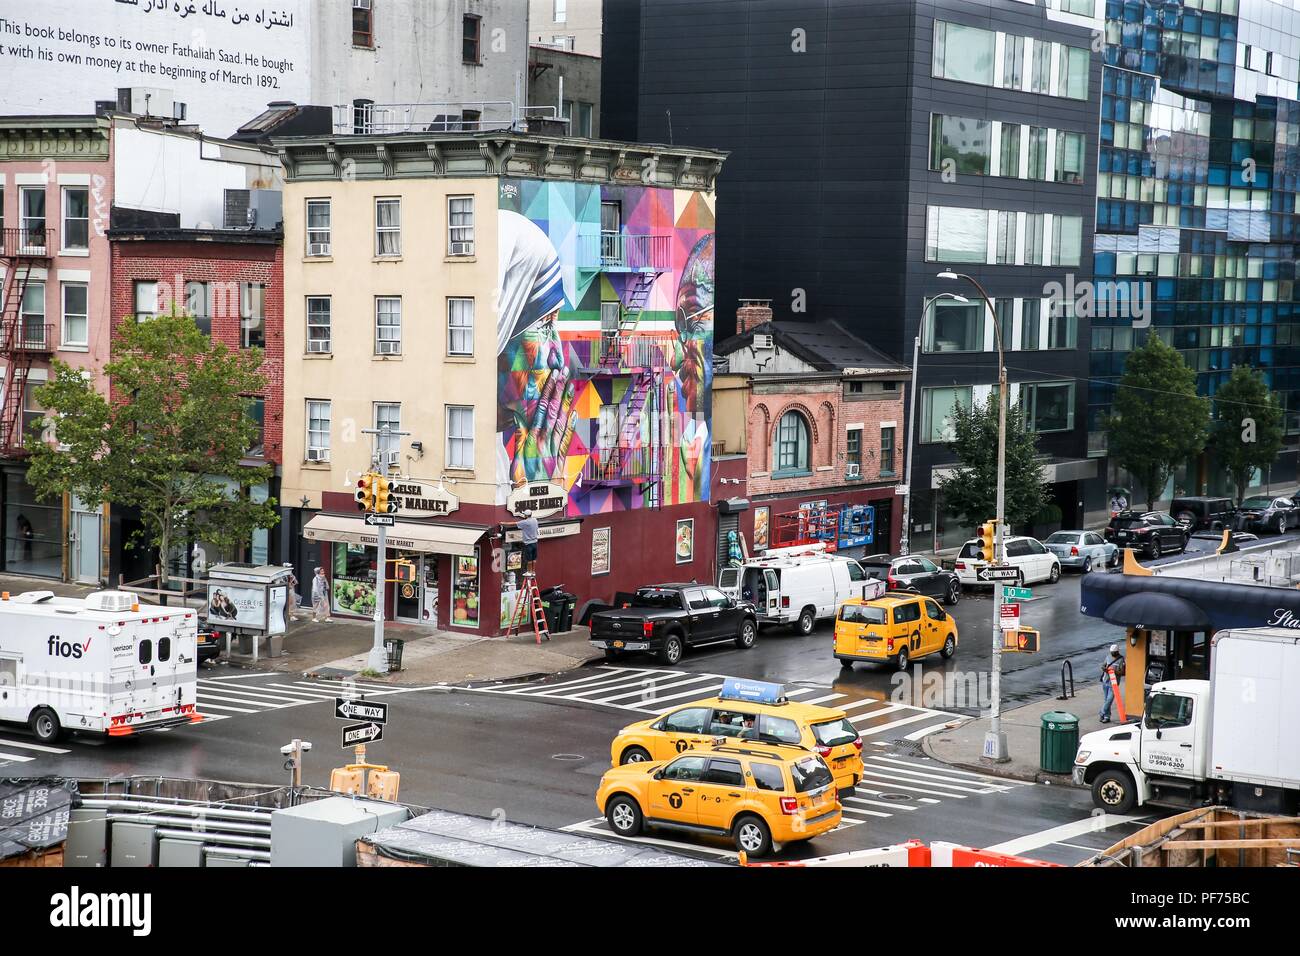 New York, USA. 20th August 2018. Madre Teresa of Calcutta and Mahatma Gandhi's work by the muralist Eduardo Kobra on the 'Colors for Freedom' project is being held in New York City in the United States on Monday. The project plans to spread works around the city. (PHOTO: VANESSA CARVALHO/BRAZIL PHOTO PRESS) Credit: Brazil Photo Press/Alamy Live News Credit: Brazil Photo Press/Alamy Live News Stock Photo